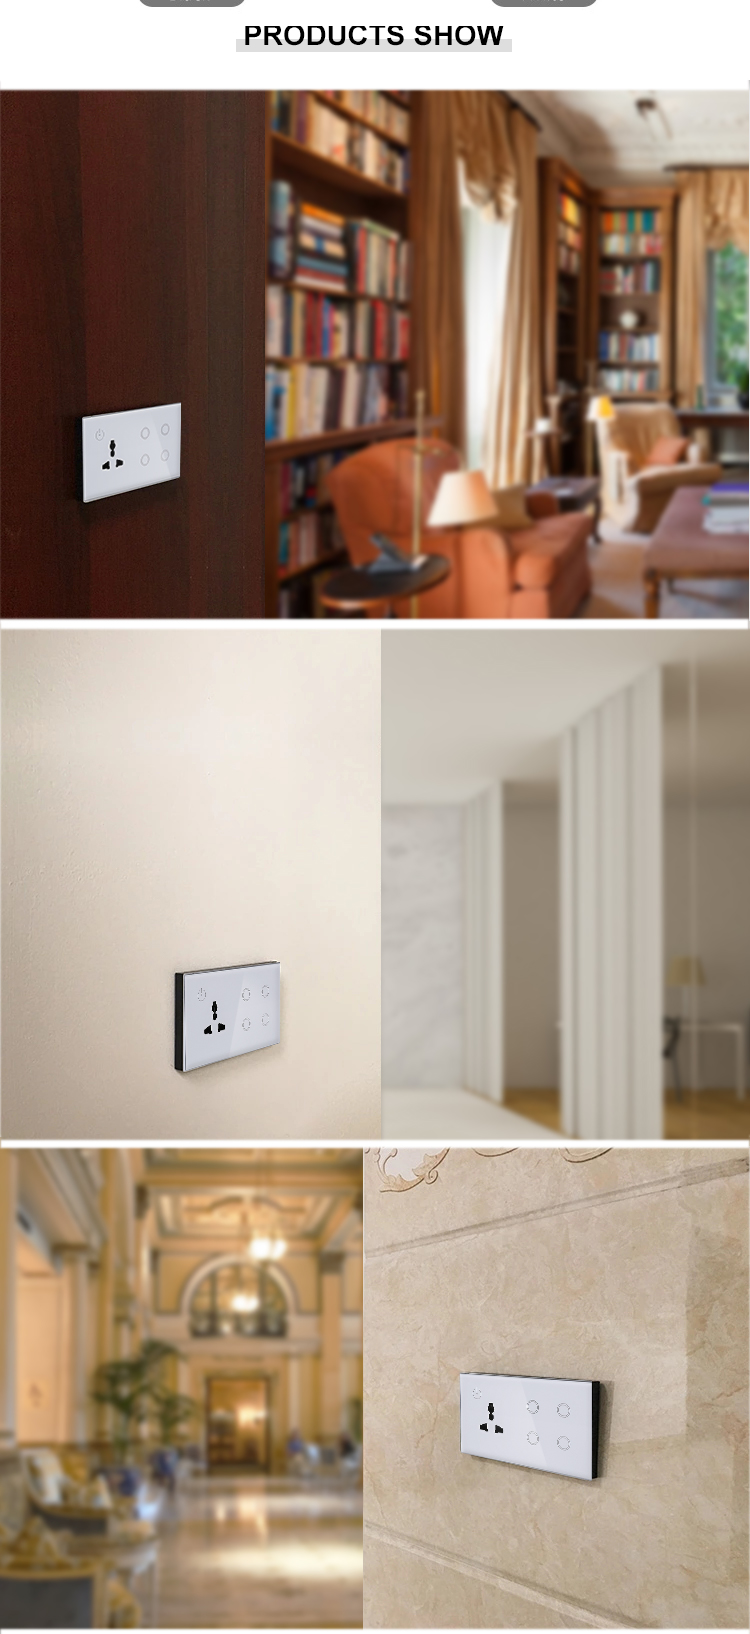 MAKEGOOD 147*86MM UK Standard Combination Switch Touch Glass Panel Smart WIFI 4gang Light Switch and Wall Socket Voice Control